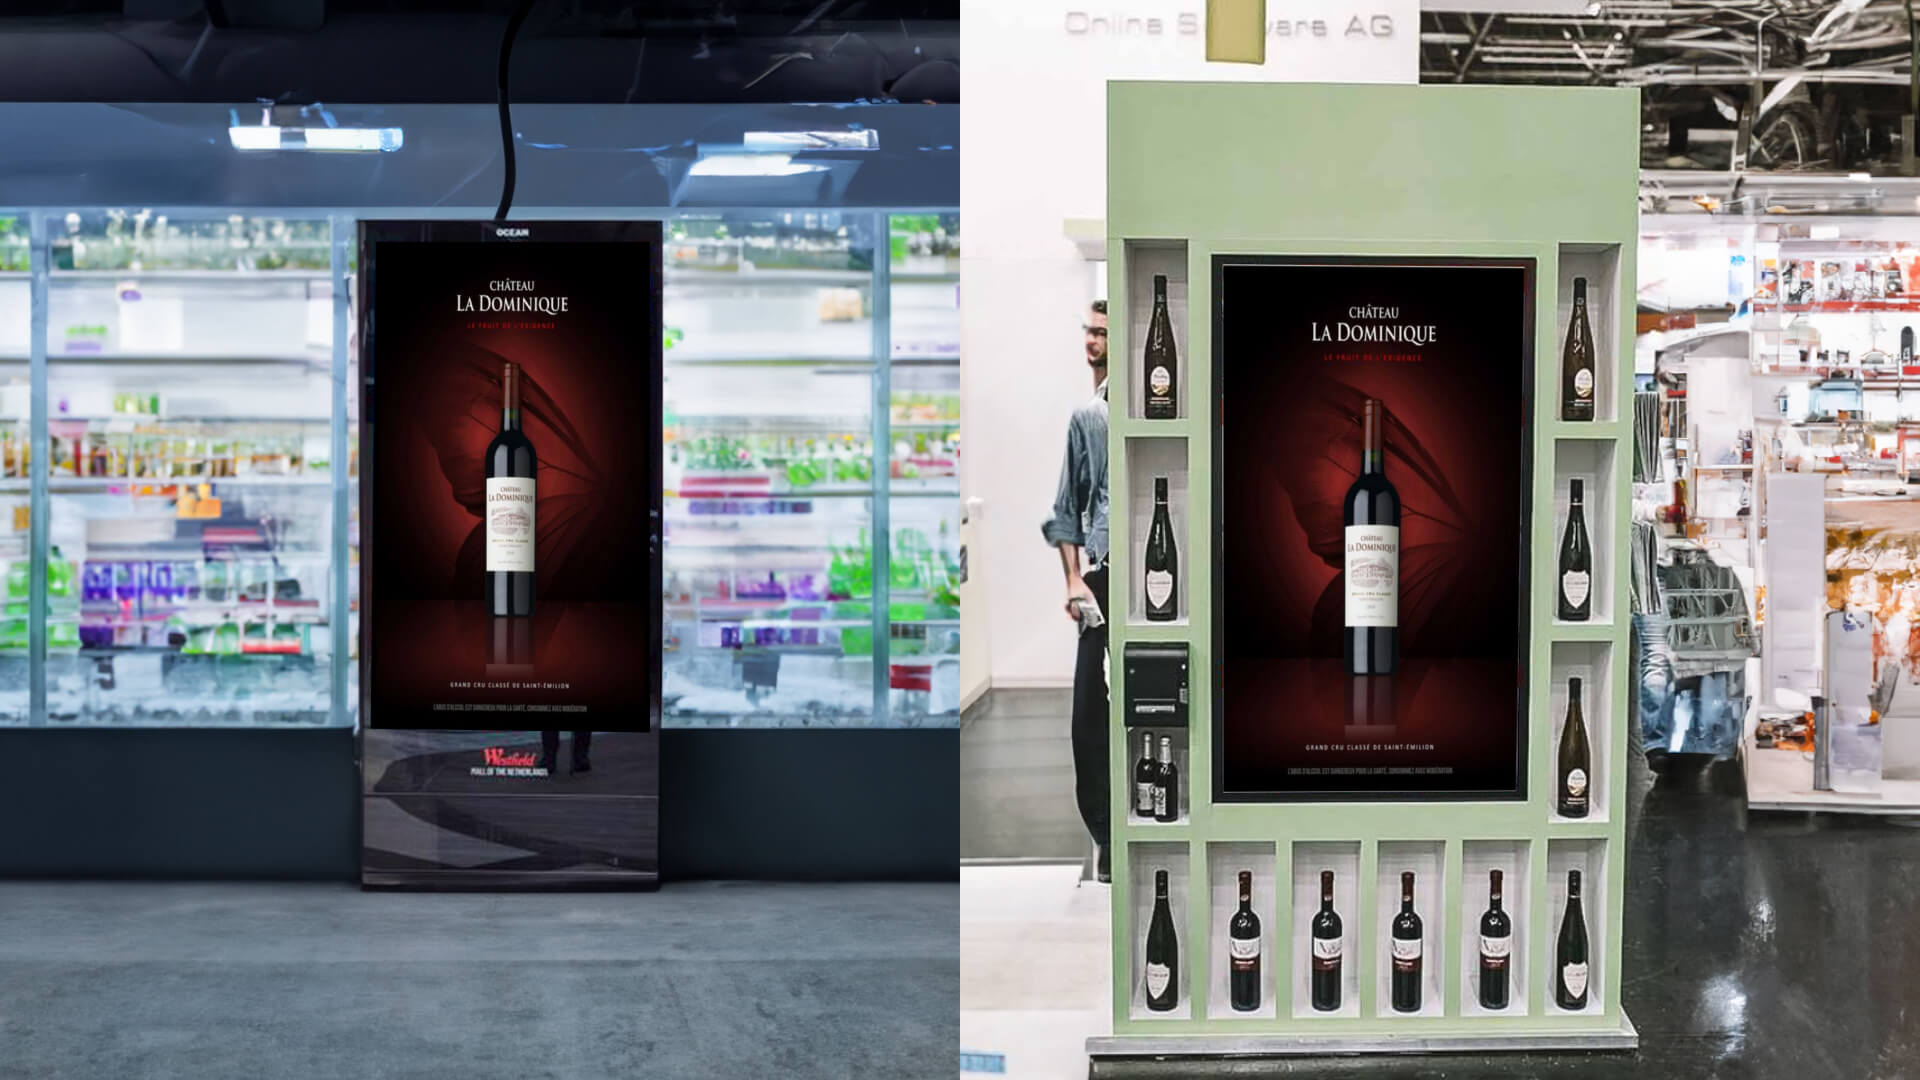 A liquor store aisle sign updates in real-time in different locations.